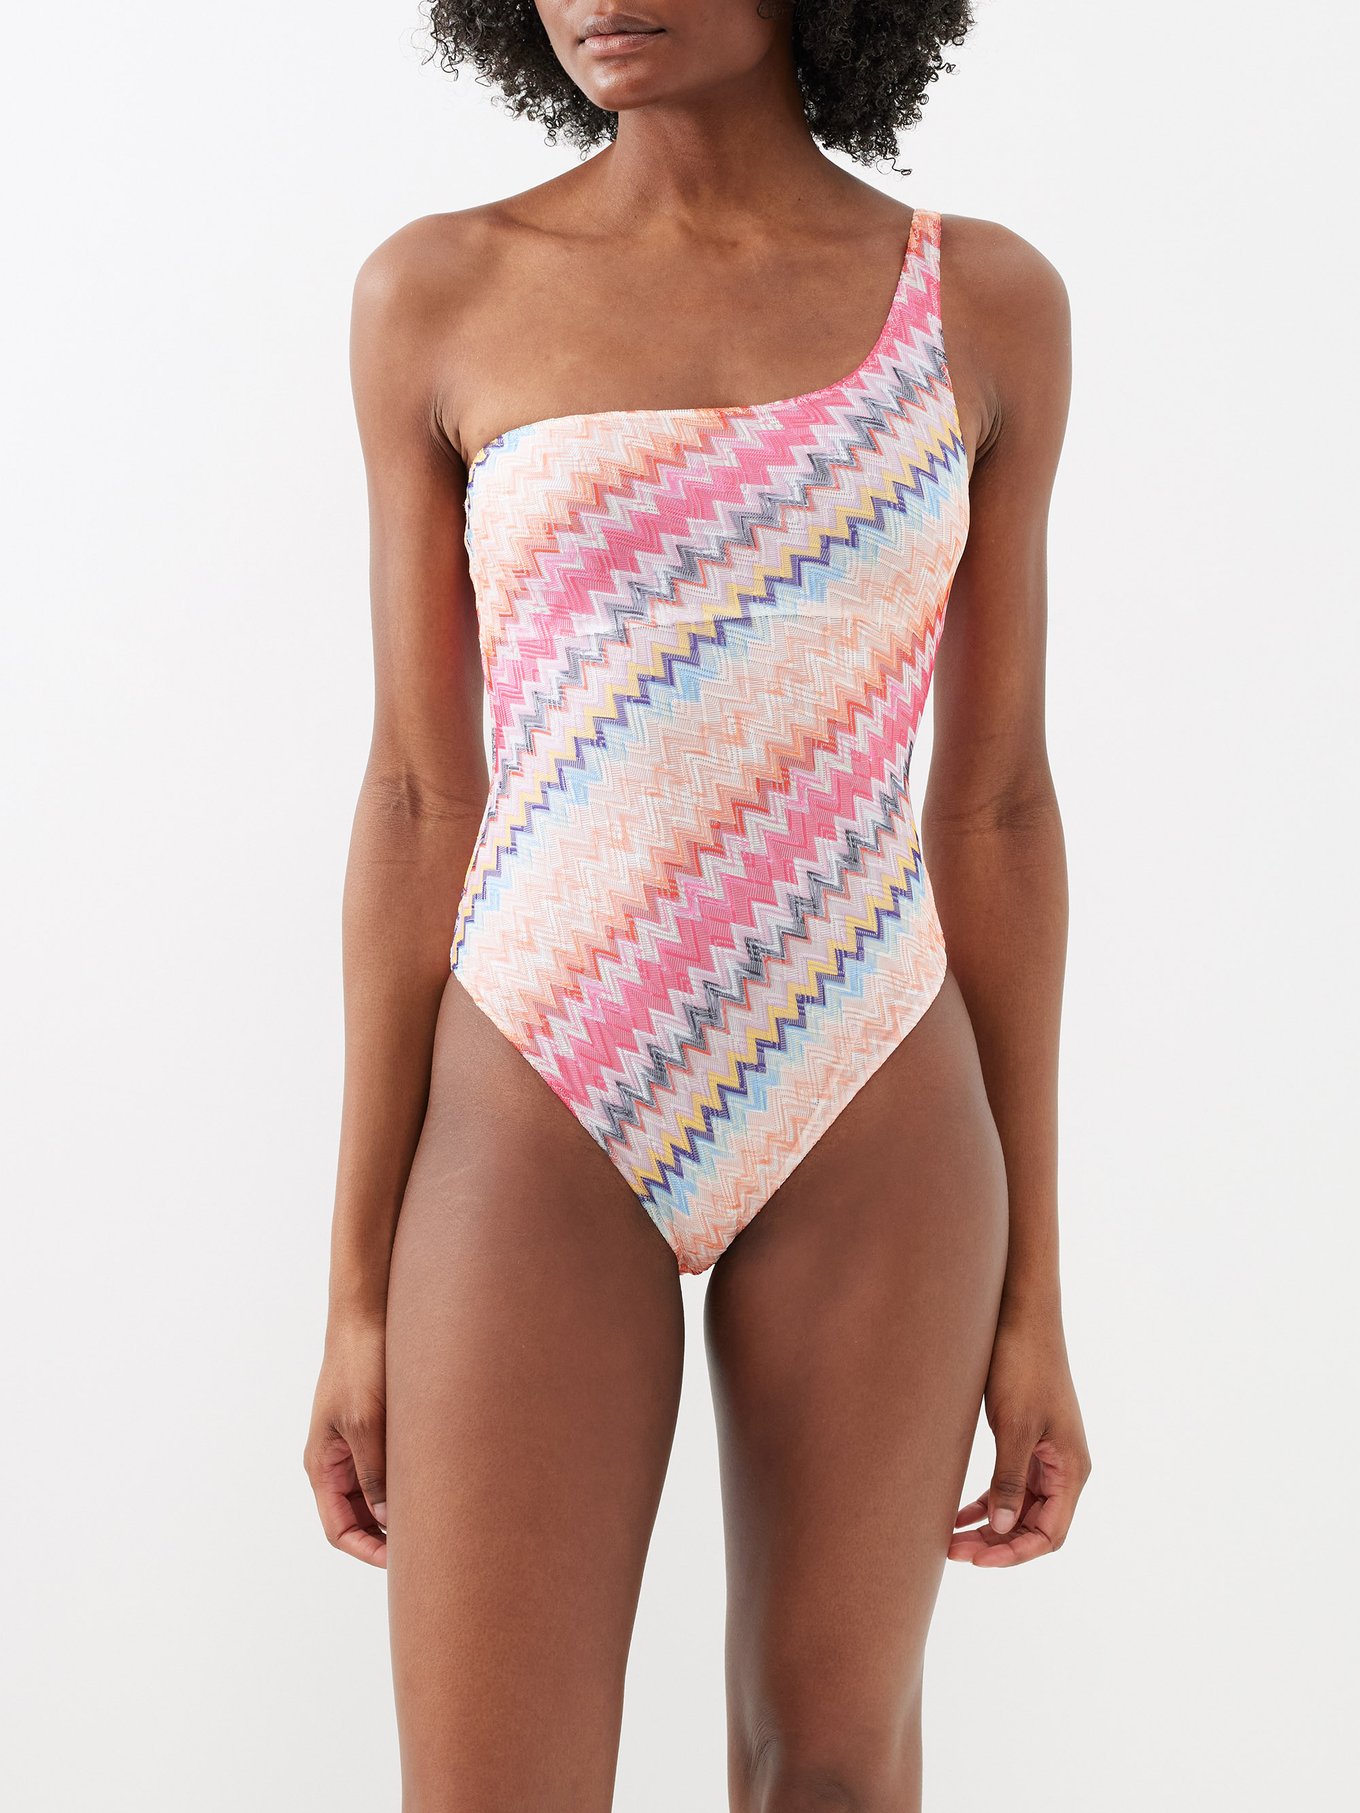 SPANX Riveting Ruched Cup Sized One Piece Swimsuit Zigzag 